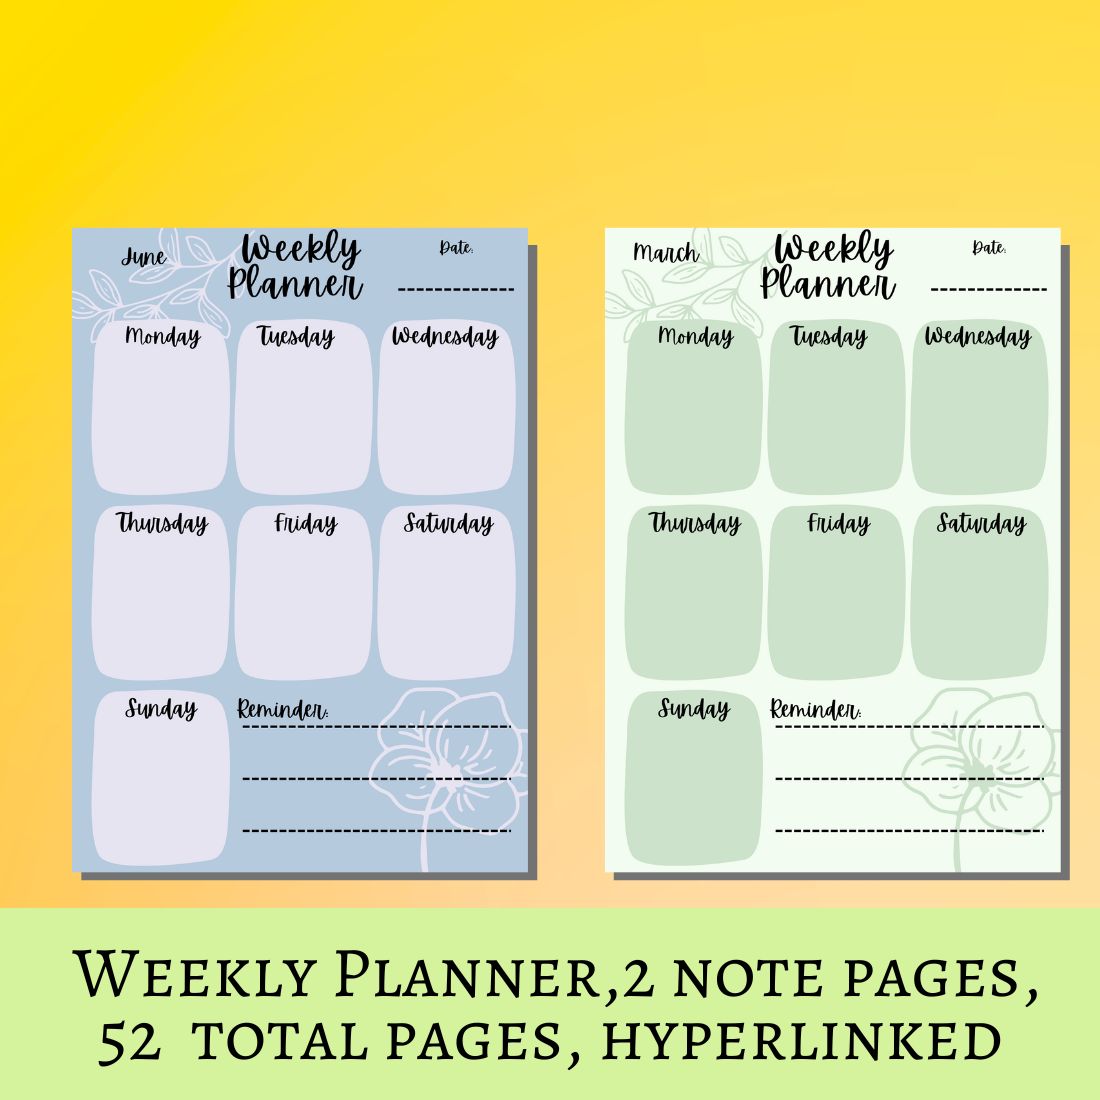 Notebook with weekly planner for 1 year.